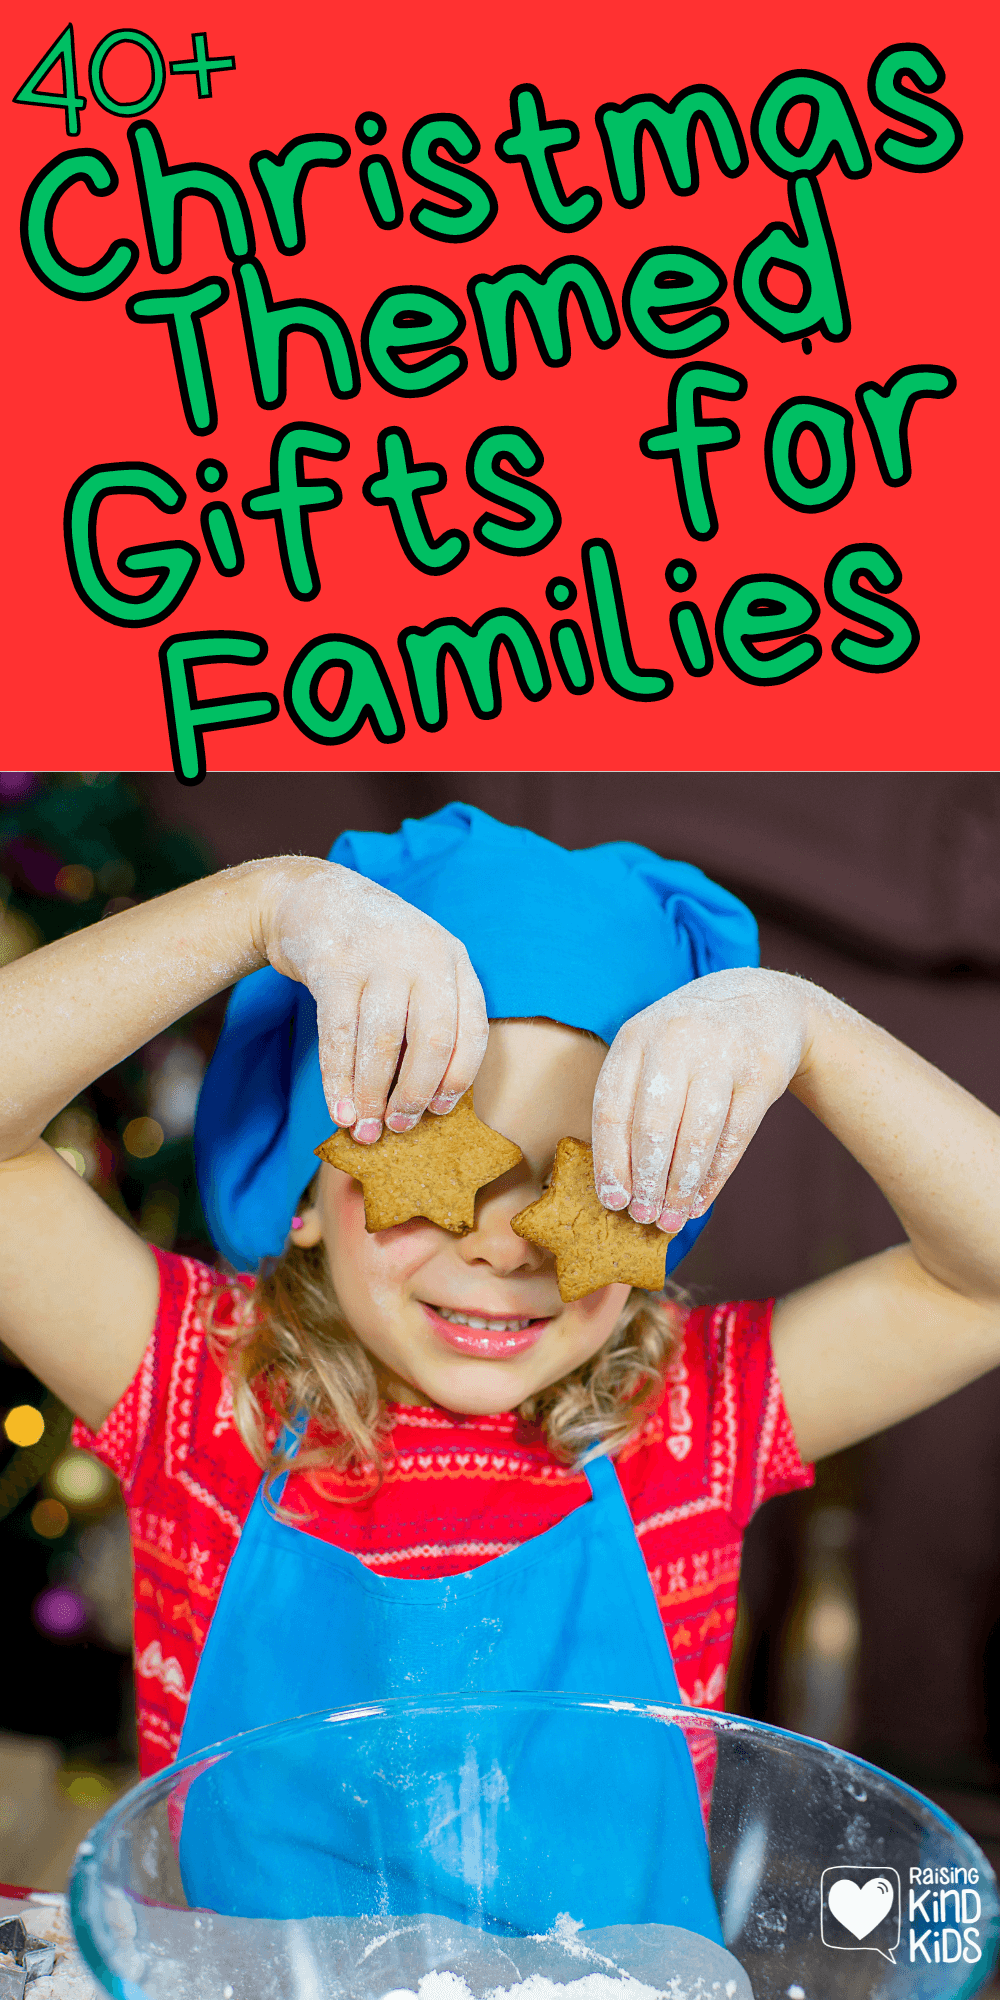 You'll love these Christmas theme gits for kids and families to enjoy together that will make December even more spirited.